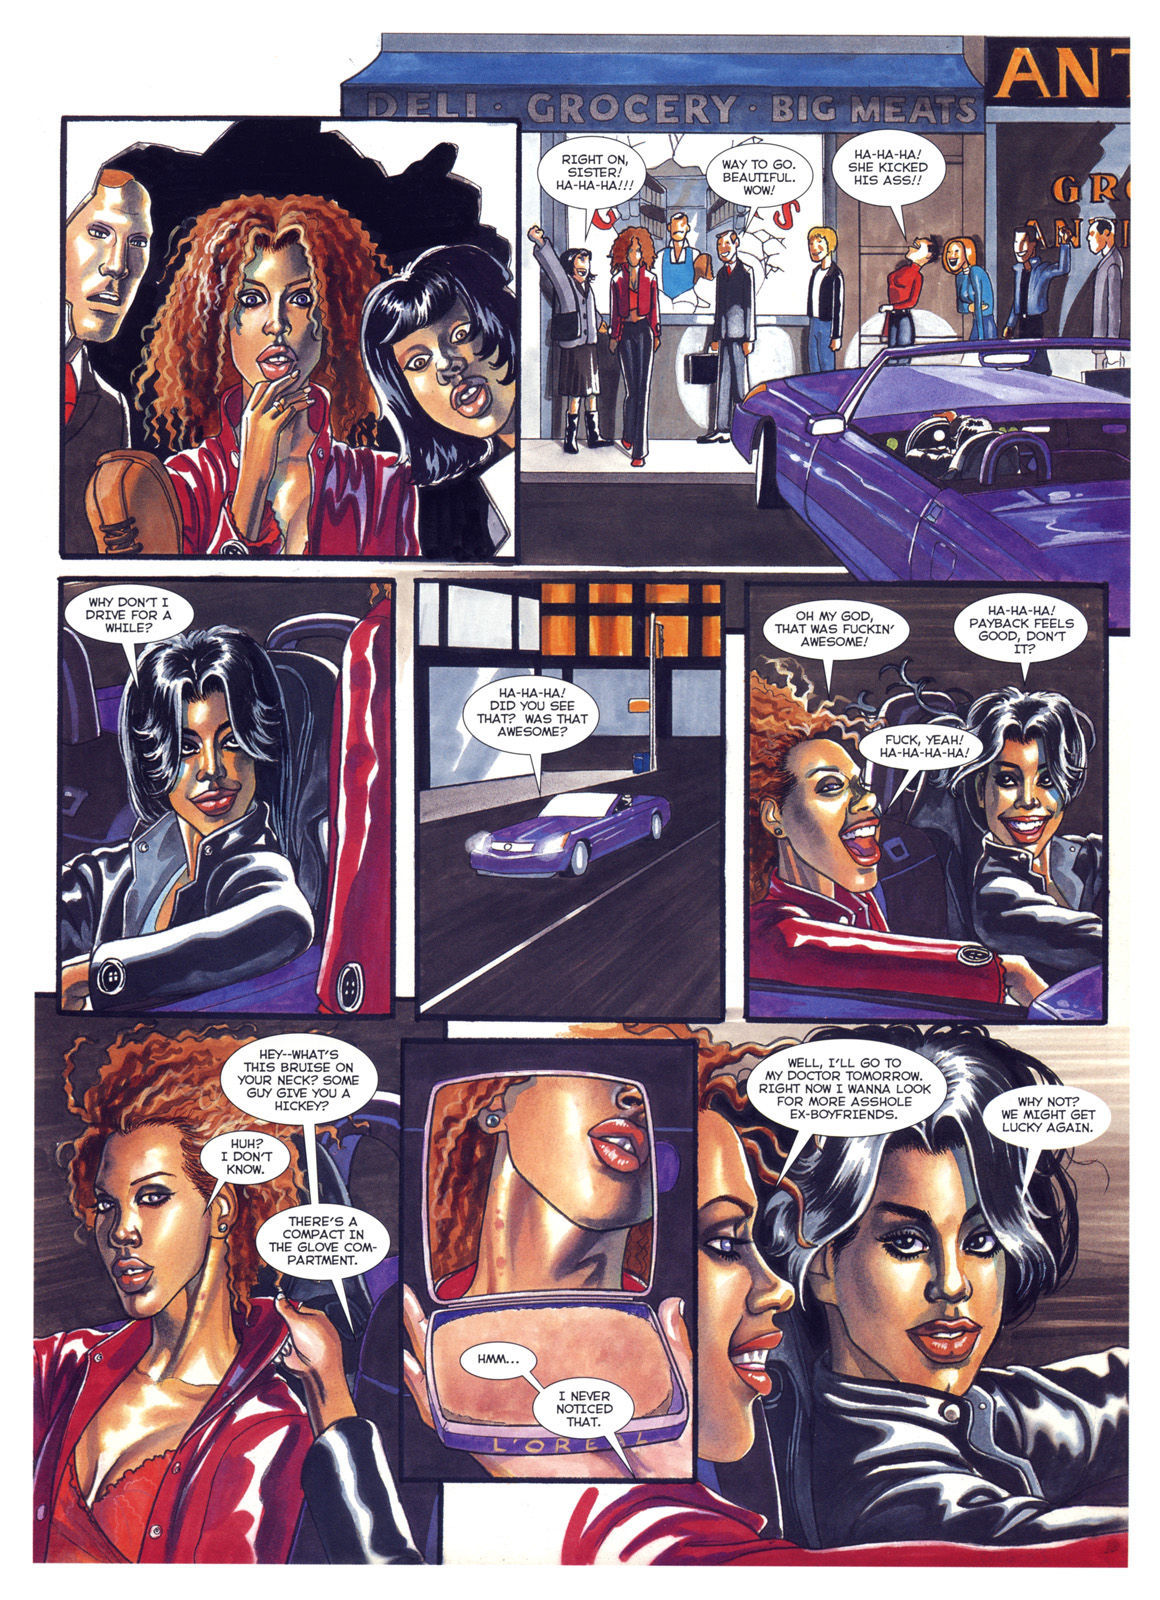 Girl The Second Coming 3 by Kevin J Taylor page 32